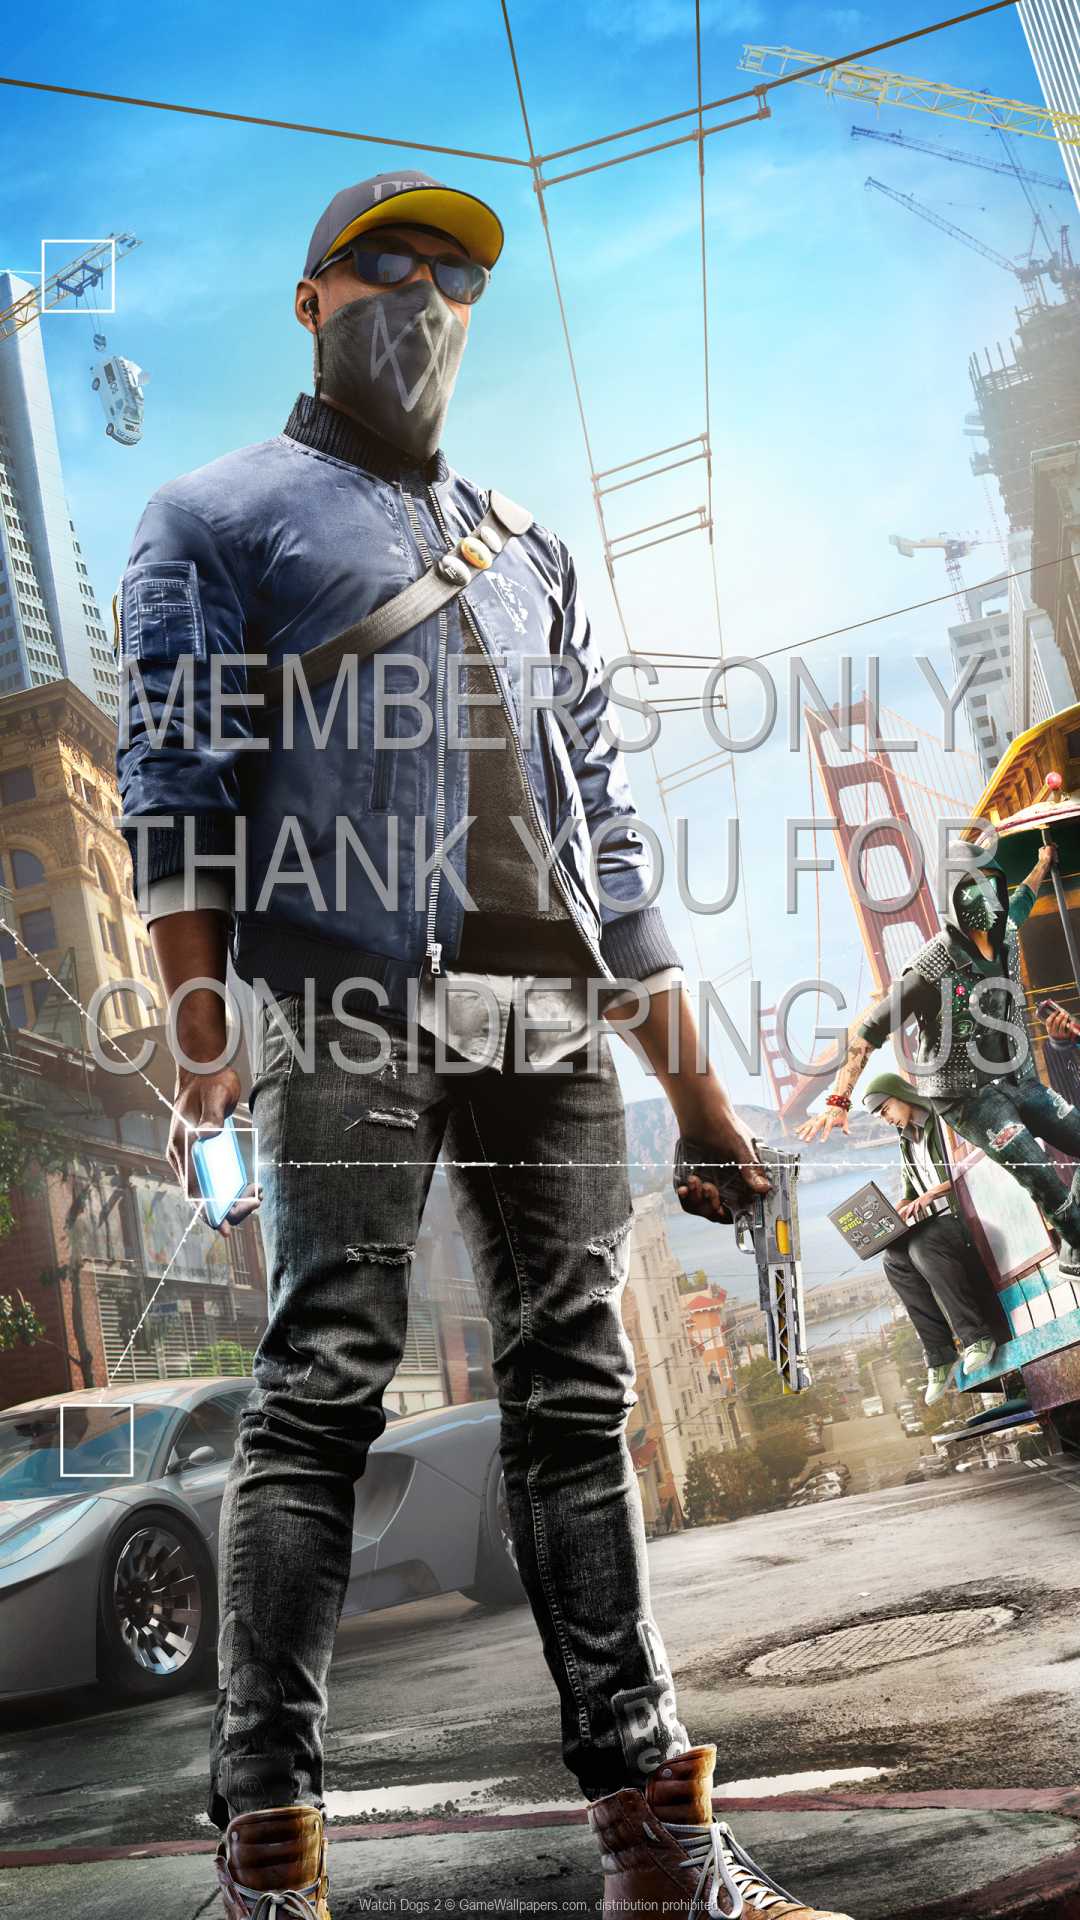 Watch Dogs 2 1080p Vertical Mobile wallpaper or background 04